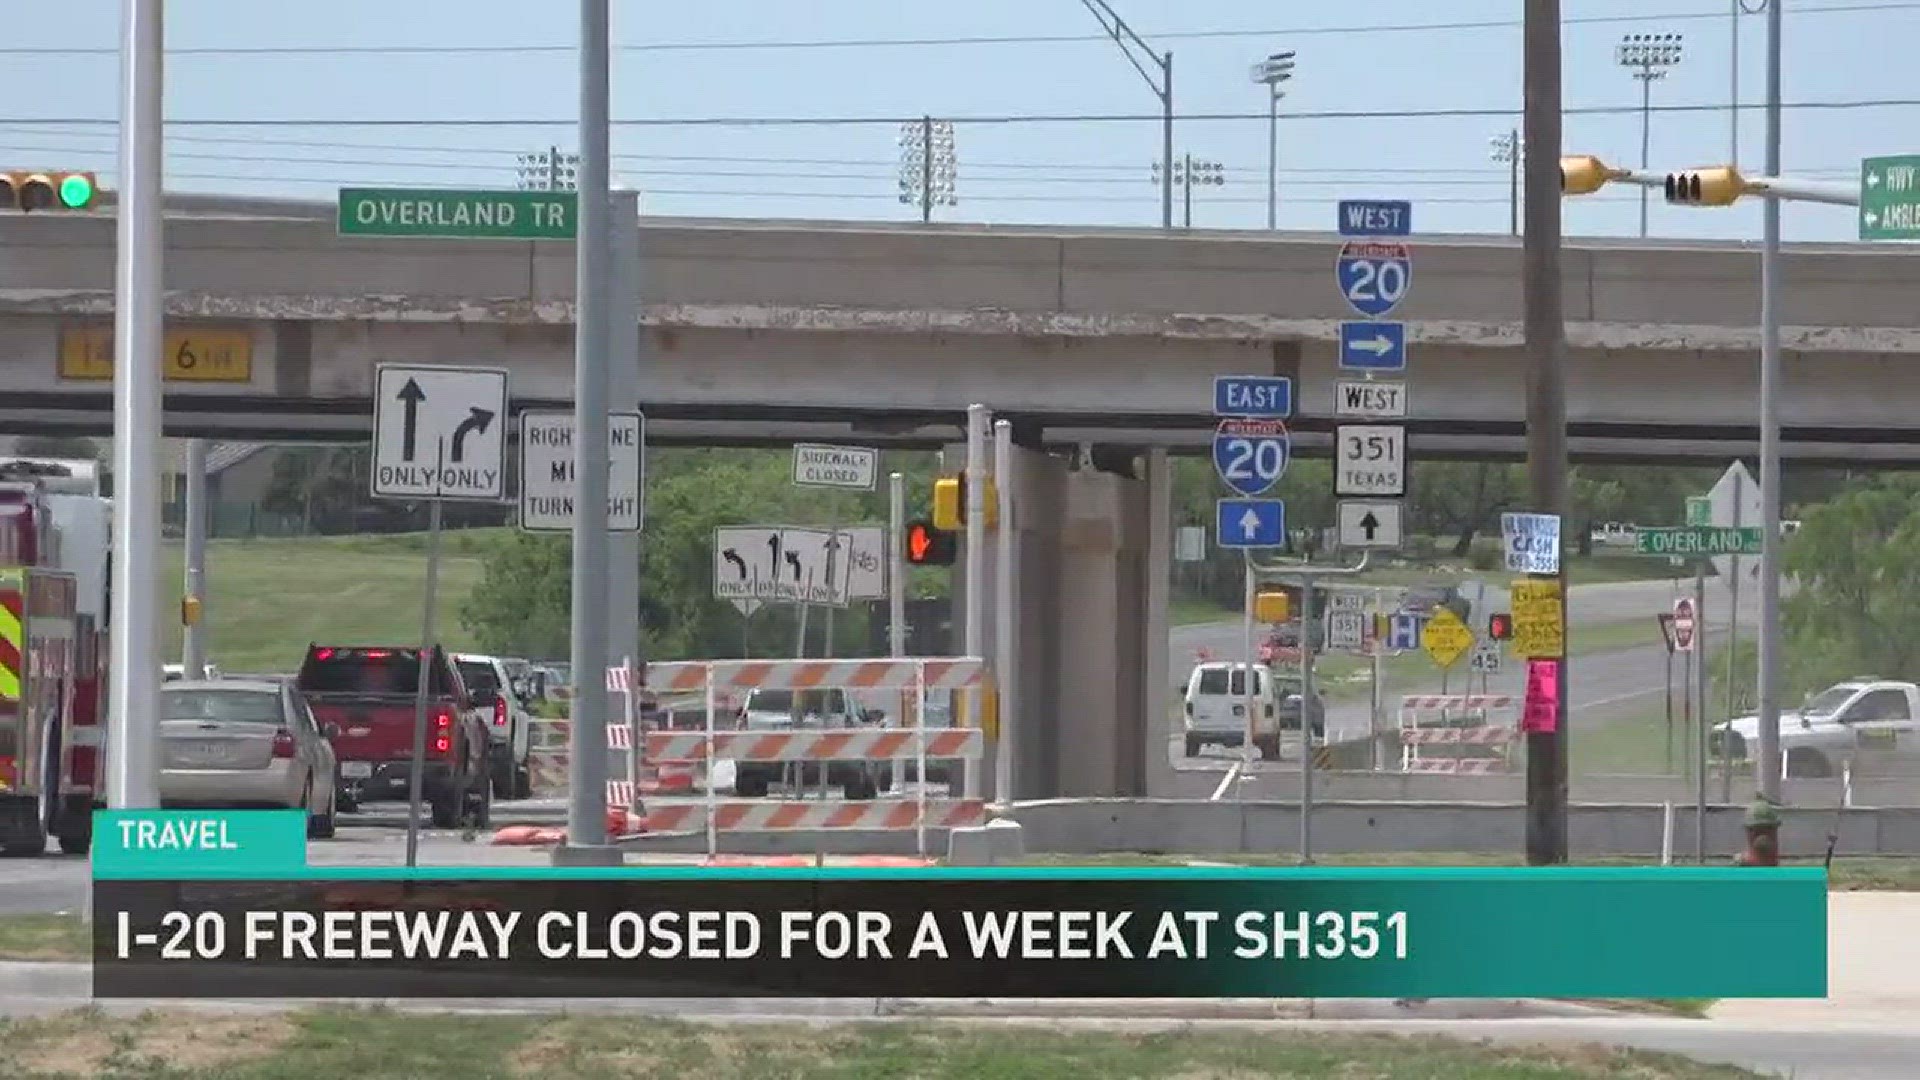 On Friday, Aug. 25, the intersection at State Highway 351 and Interstate 20 will be closed approximately for one week while the eastbound I-20 bridge is demolished and construction is done at the intersection.